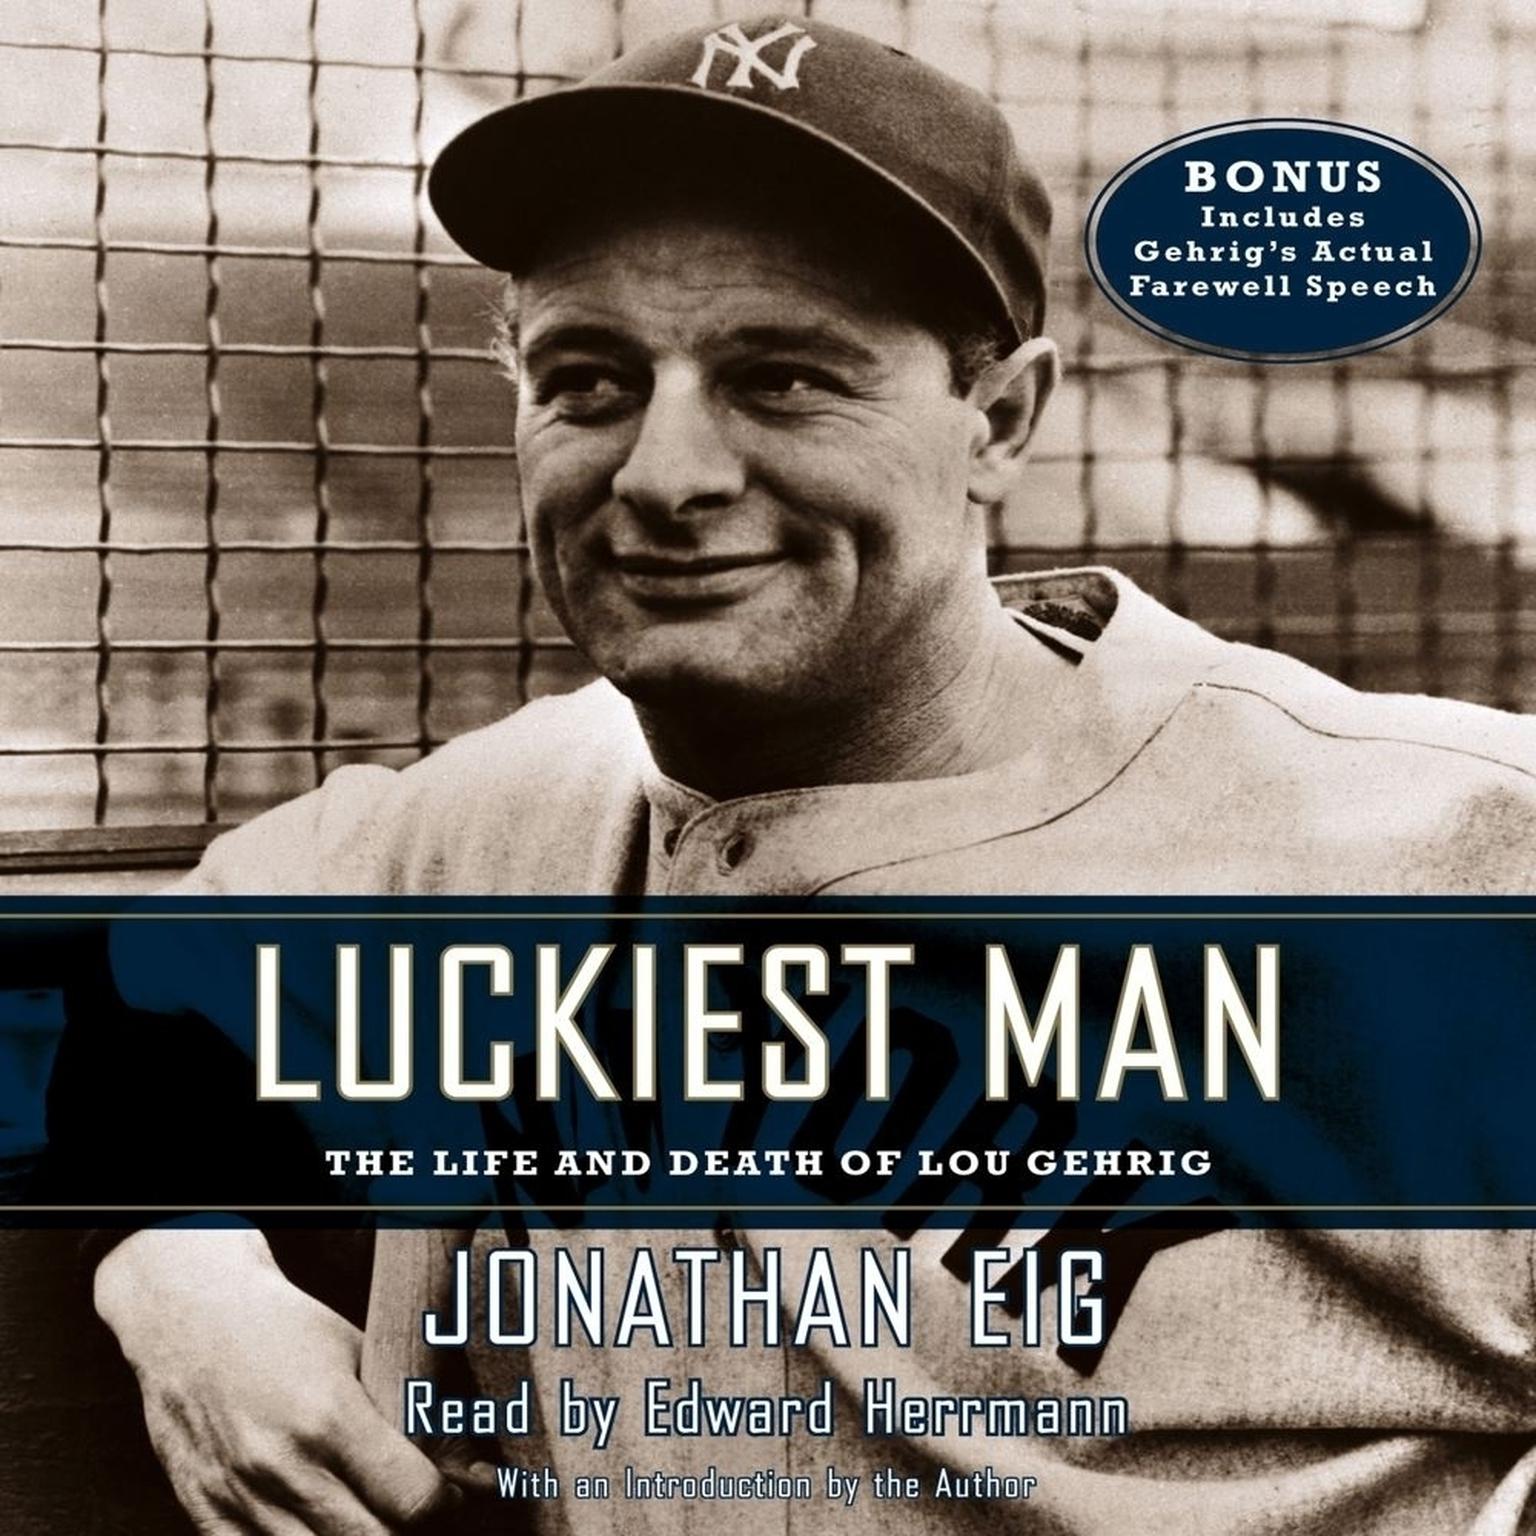 Luckiest Man (Abridged): The Life and Death of Lou Gehrig Audiobook, by Jonathan Eig